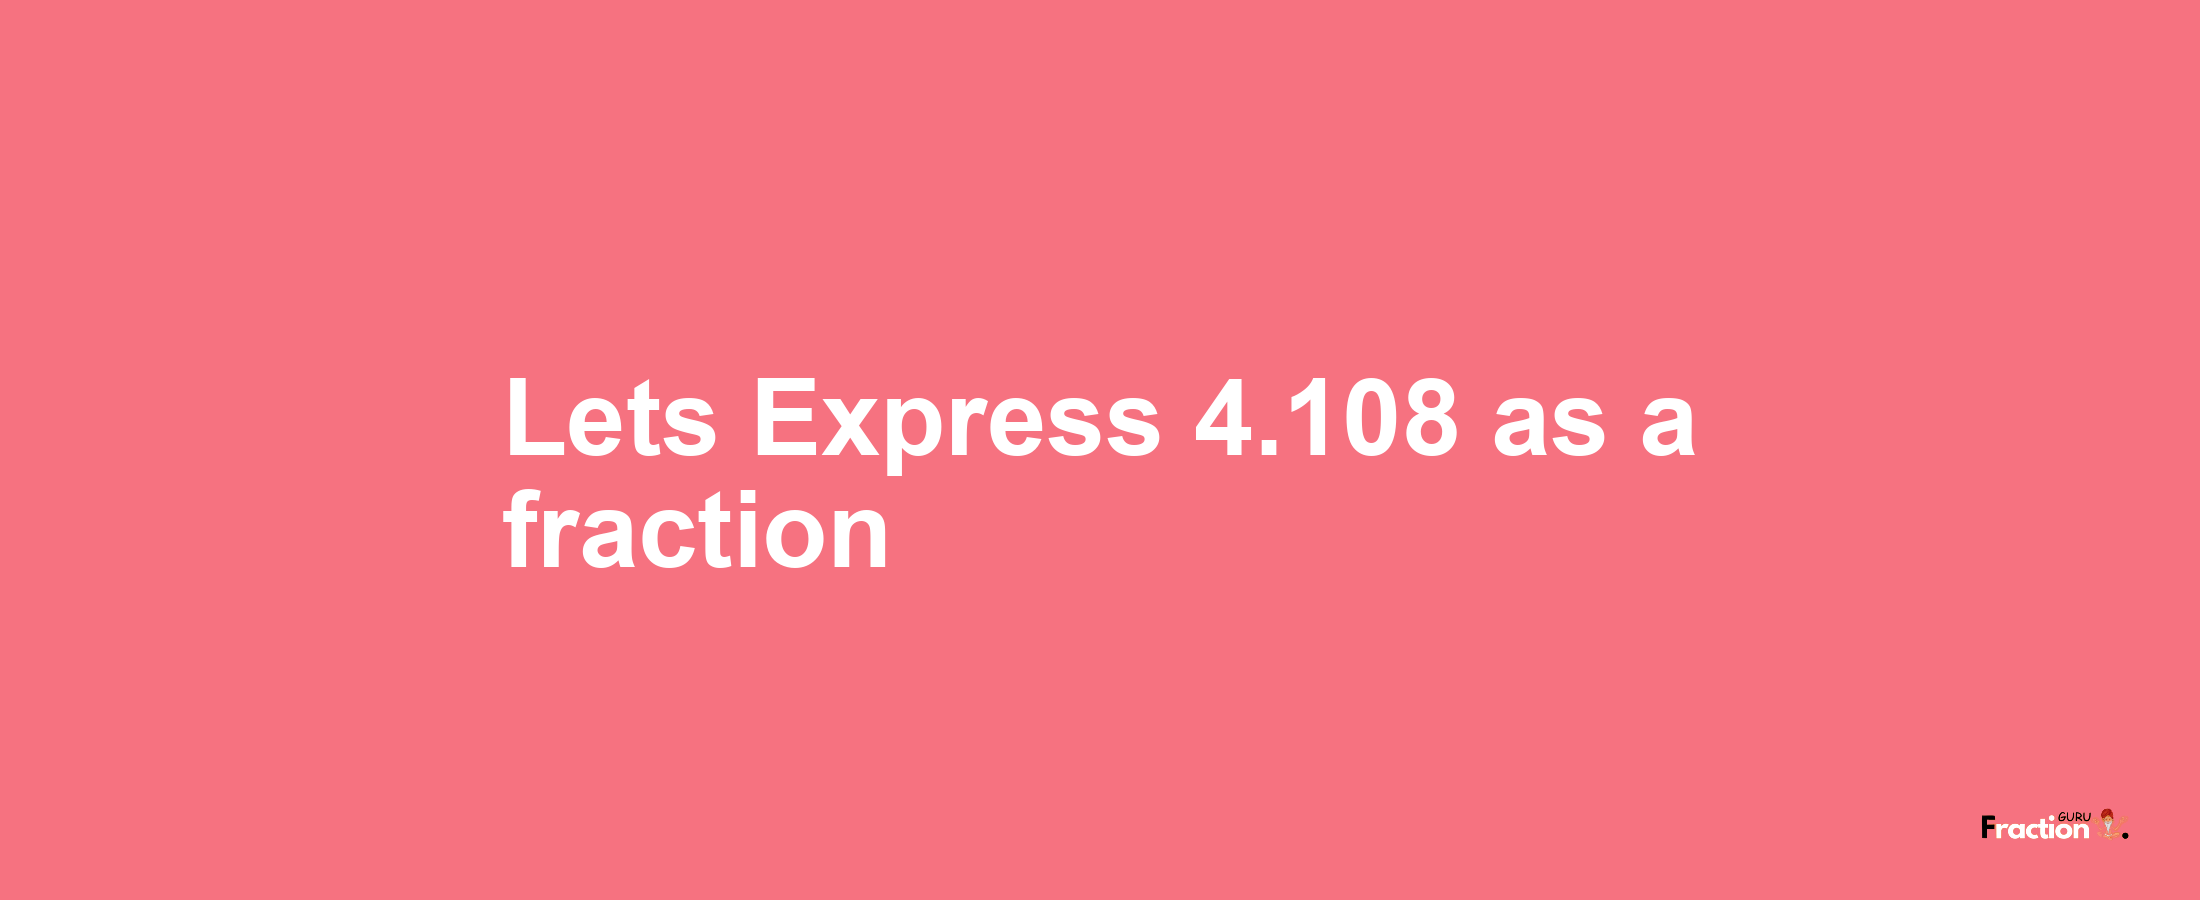 Lets Express 4.108 as afraction